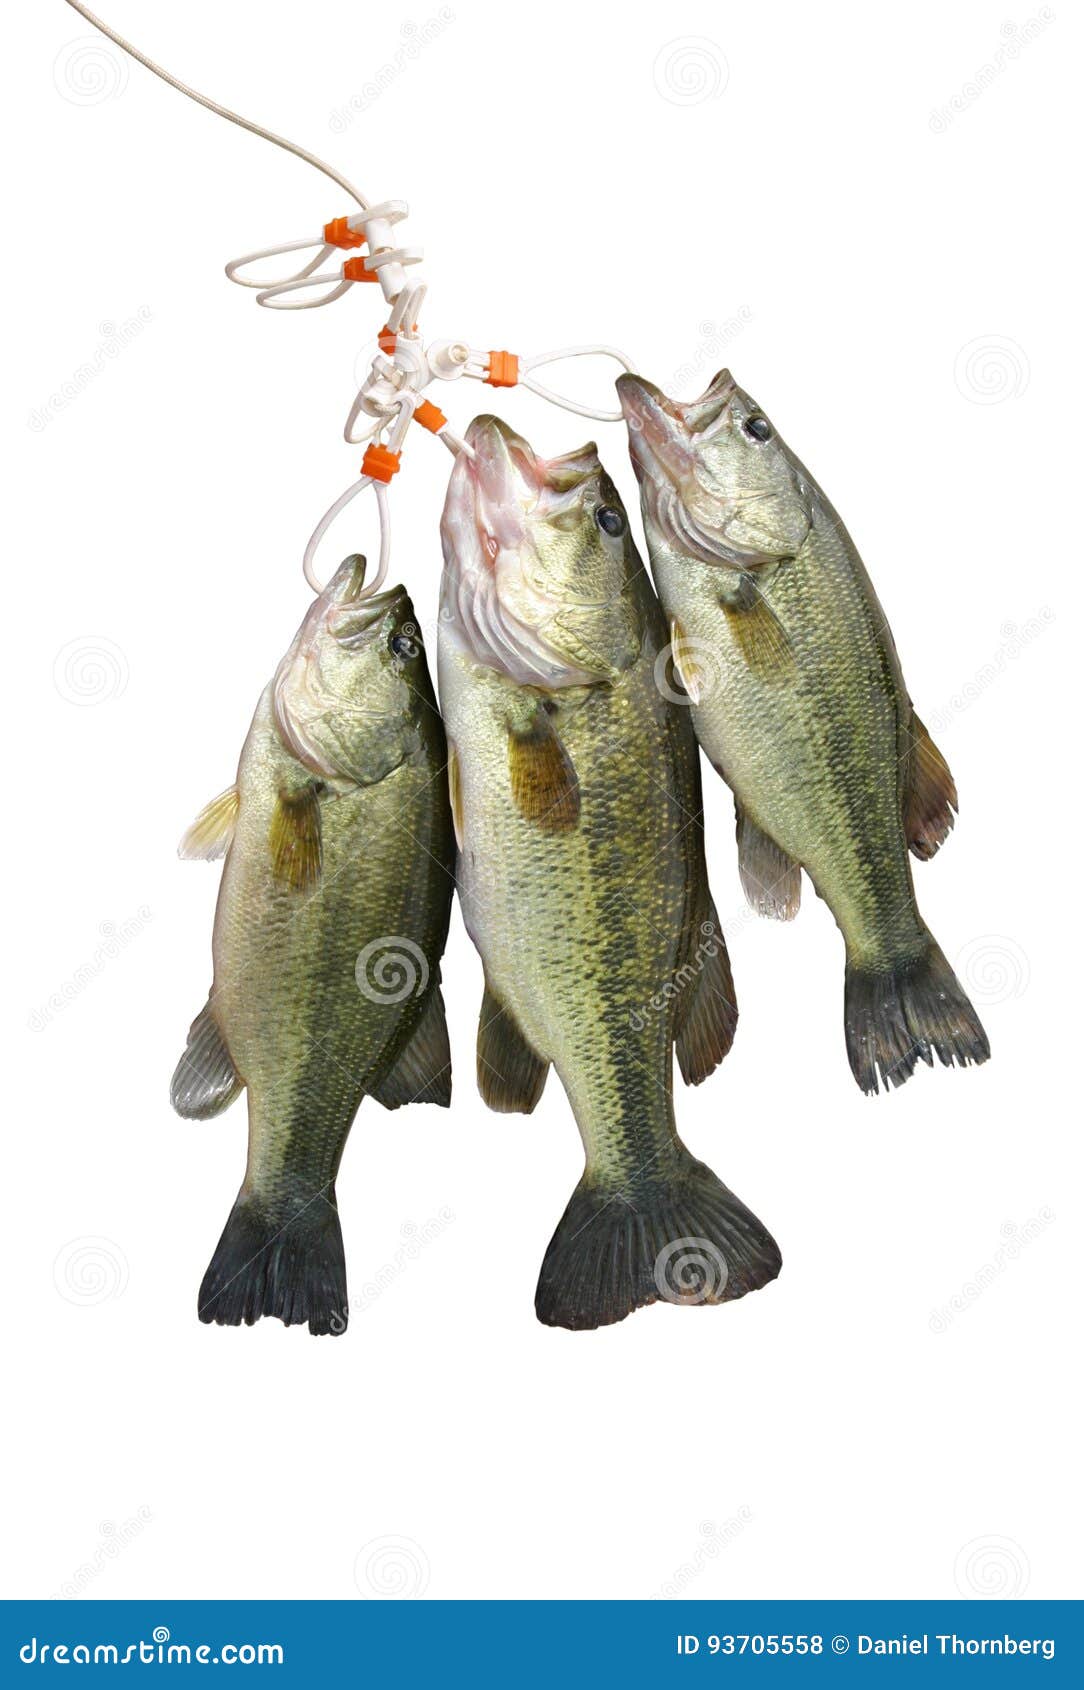 https://thumbs.dreamstime.com/z/largemouth-bass-stringer-isolated-white-three-background-93705558.jpg